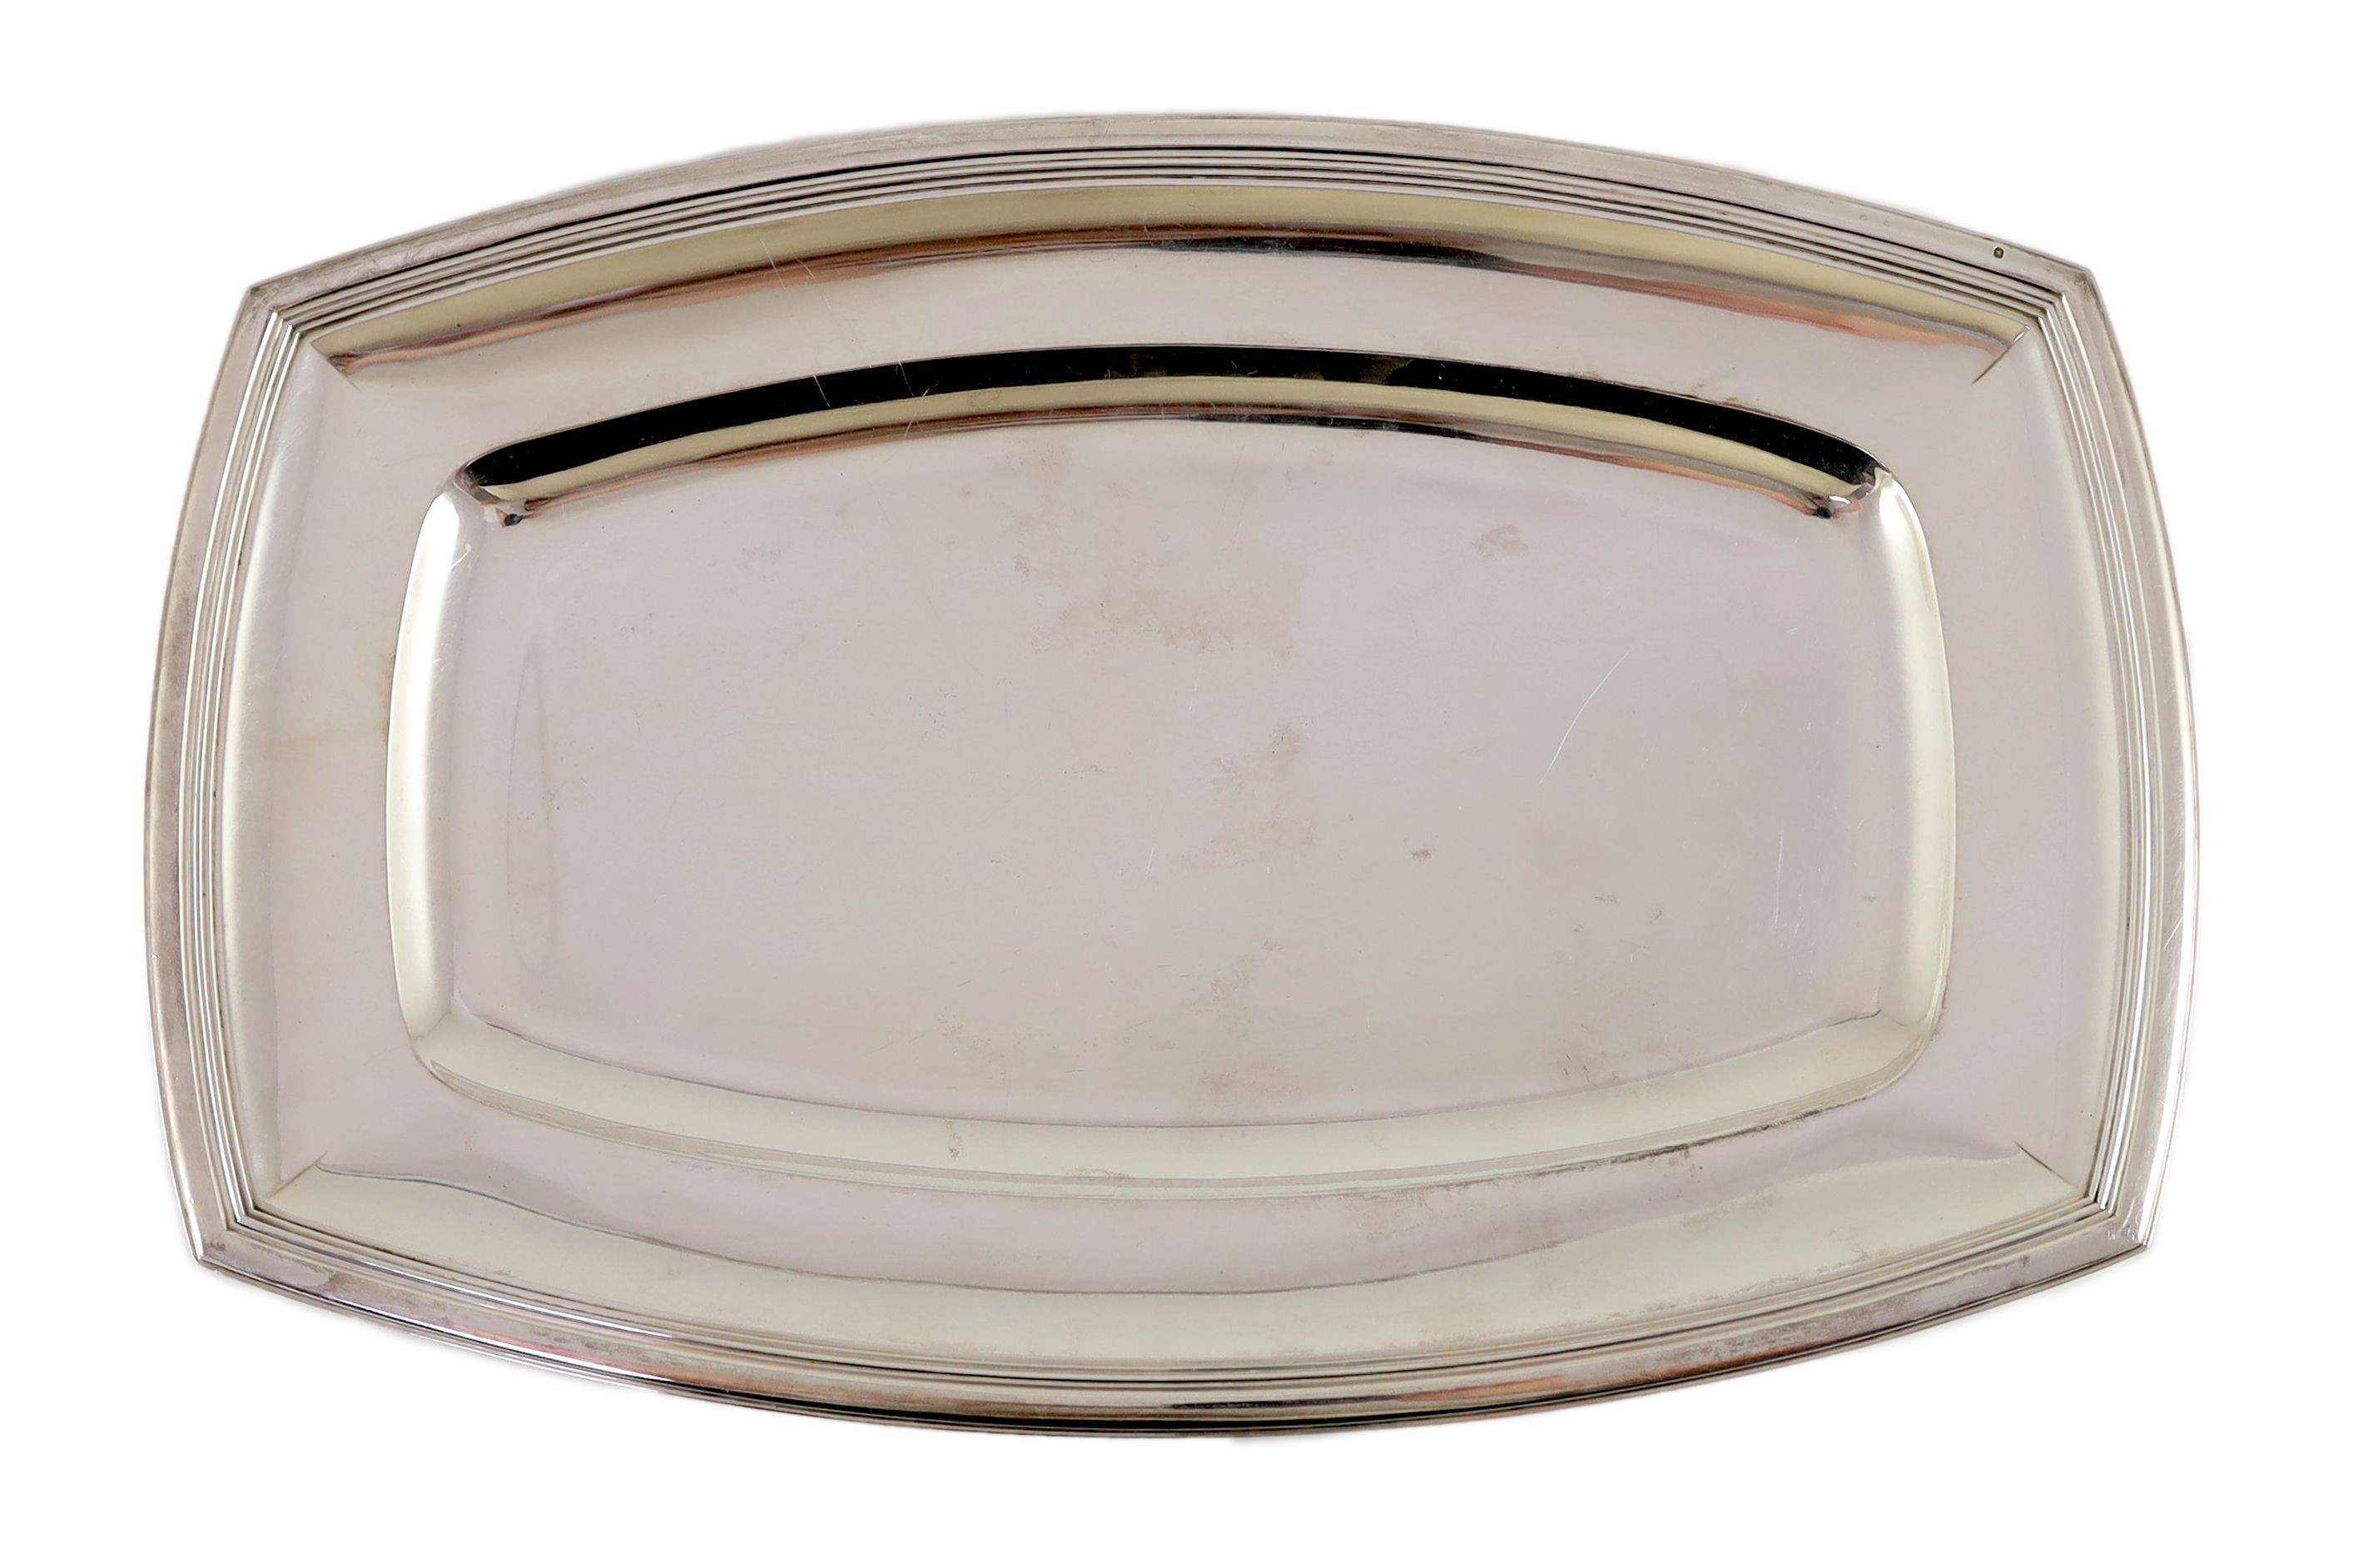 A 1920’s French 950 standard serving dish, retailed by Boin-Taburet, Paris